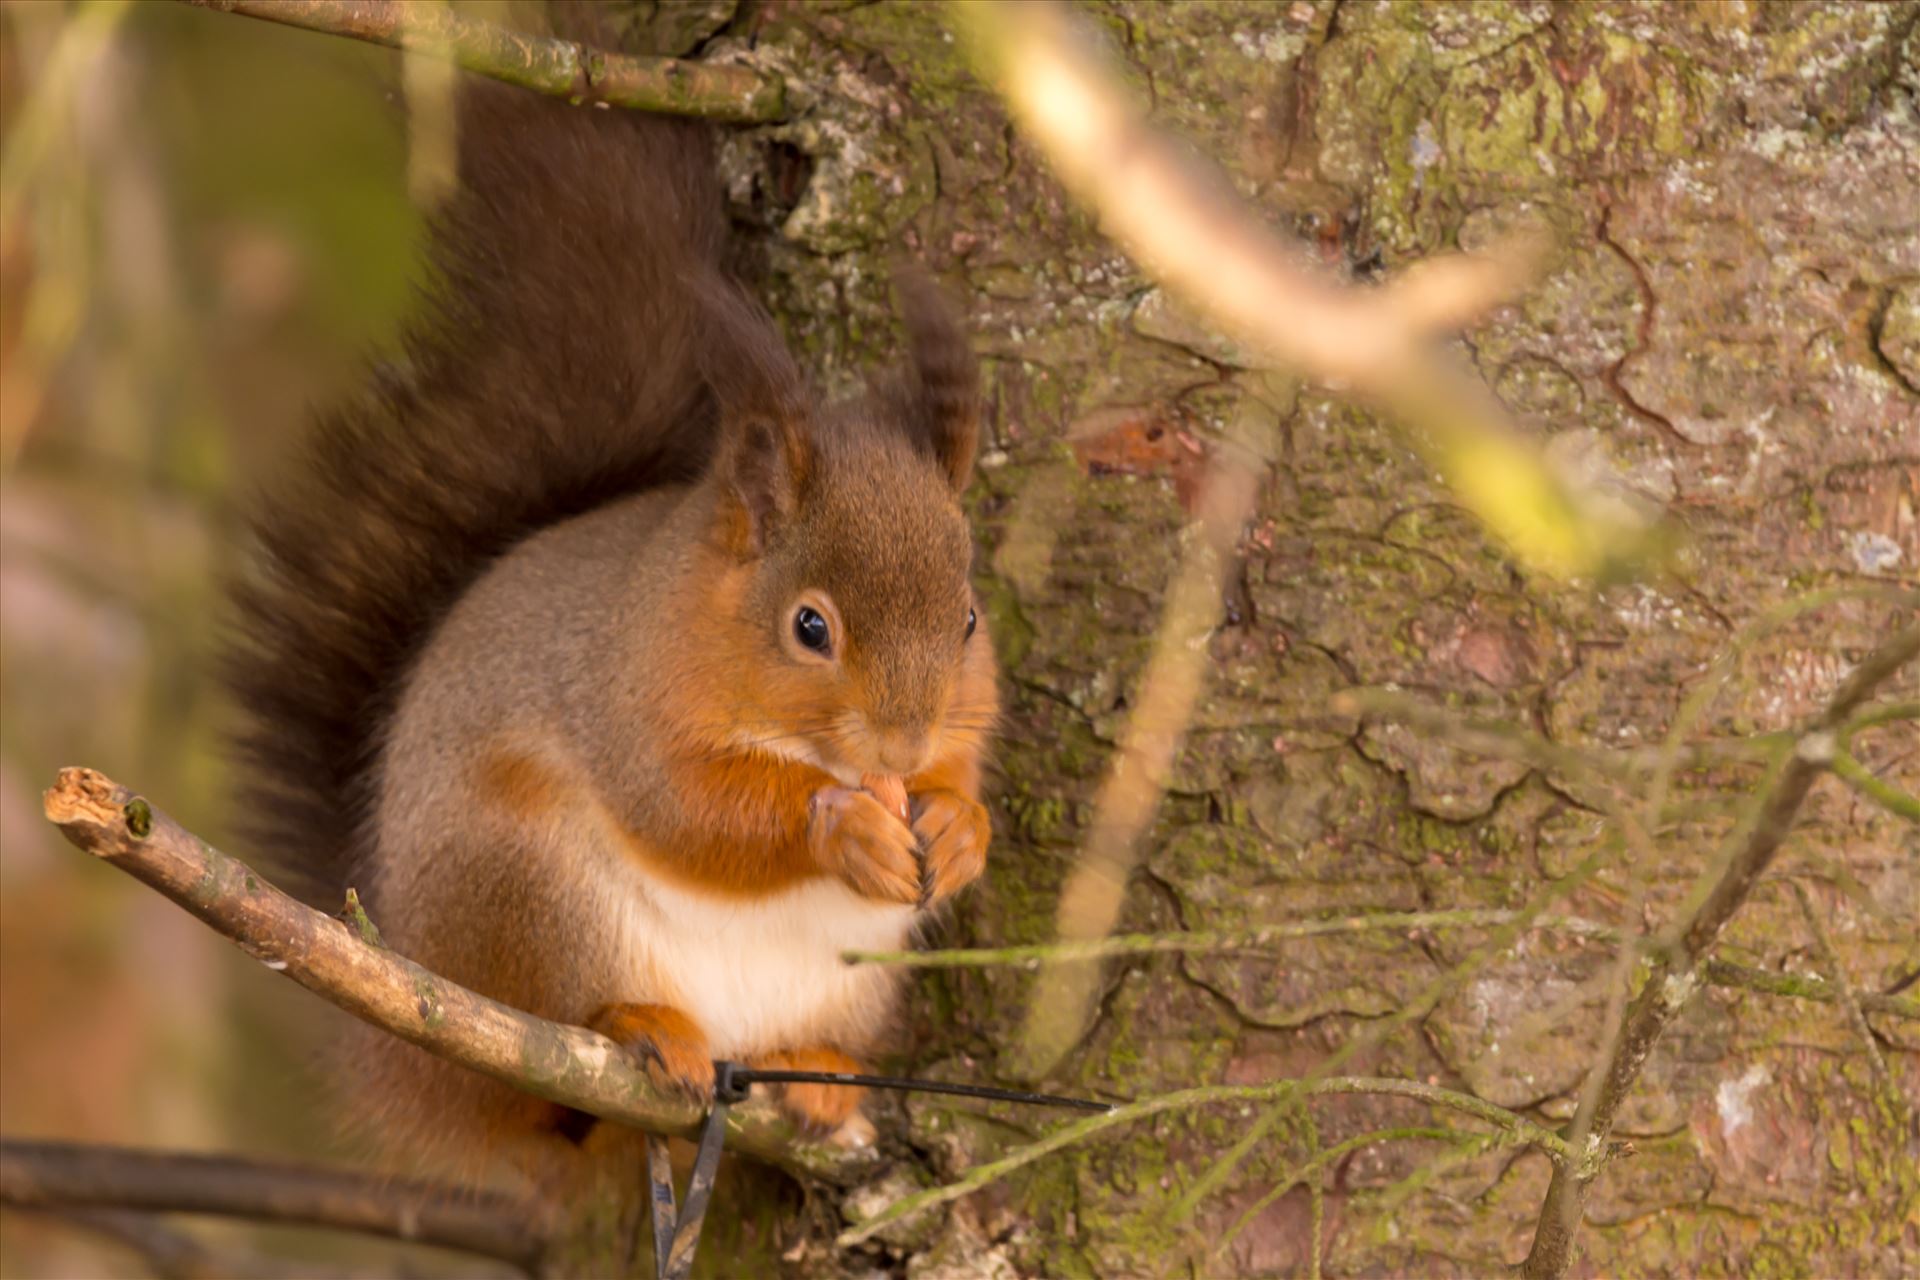 Red squirrel in the wild - The red squirrel is native to Britain, but its future is increasingly uncertain as the introduced American grey squirrel expands its range across the mainland. There are estimated to be only 140,000 red squirrels left in Britain, with over 2.5M greys. by philreay